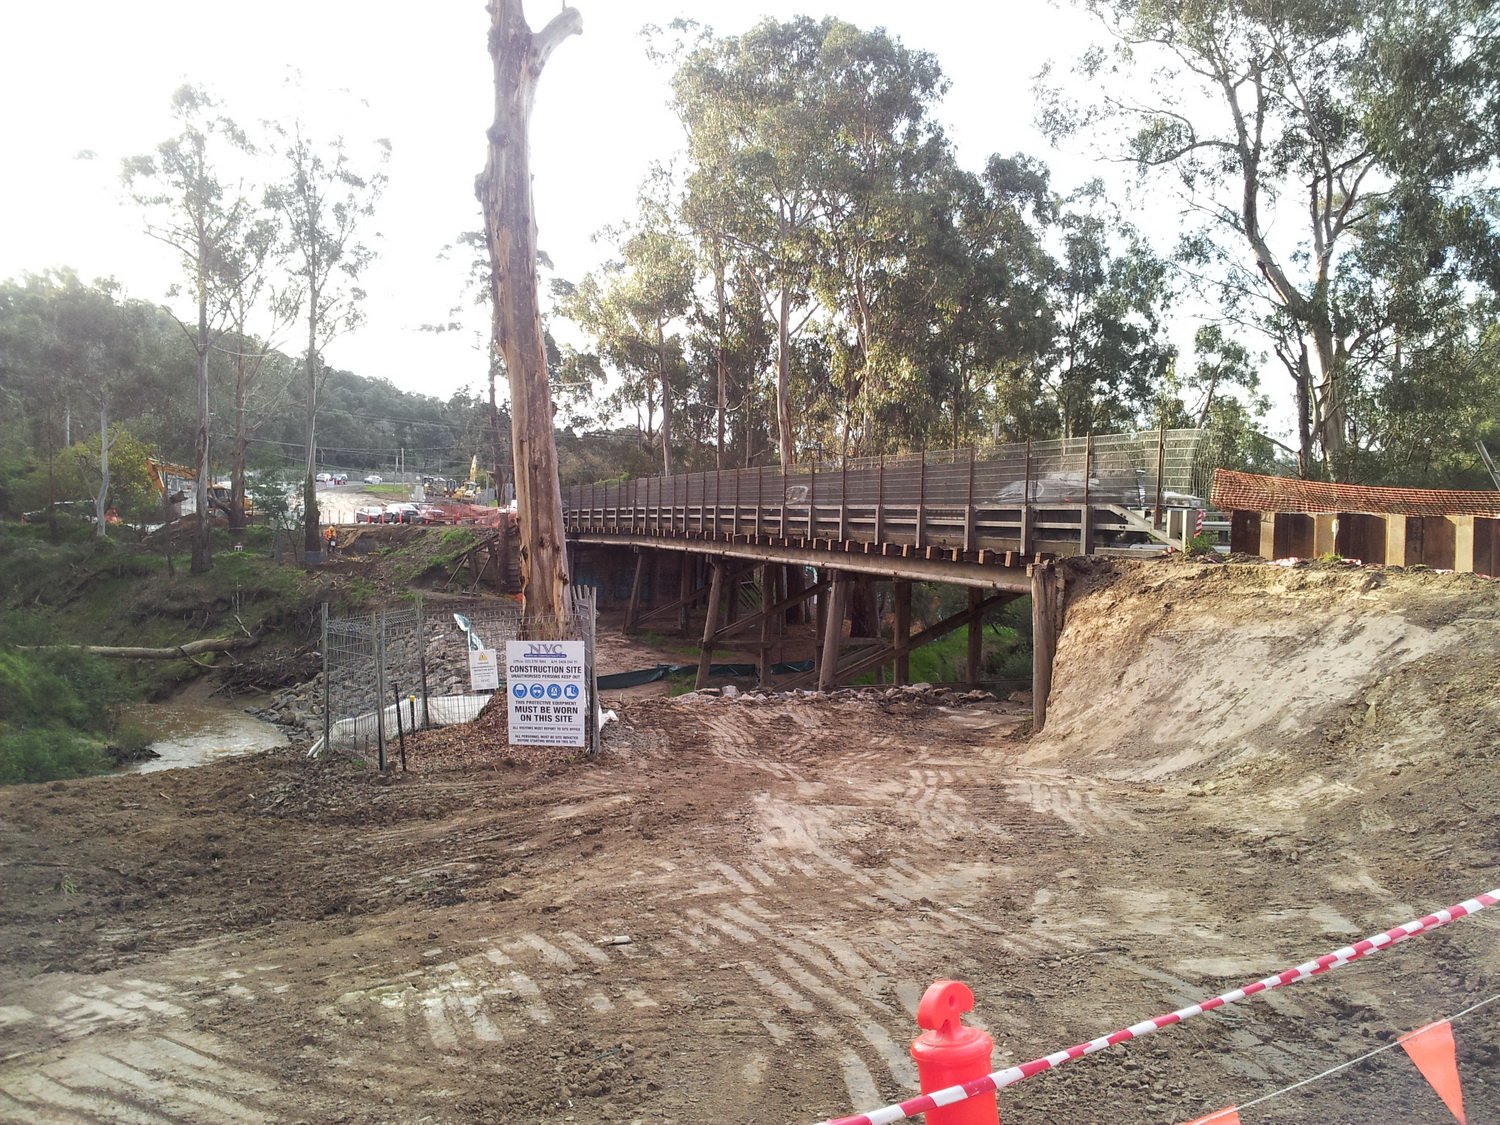 The Eltham side of the bridge is being prepared for the new roadway. Wattletree Road bridge rebuild 2012.